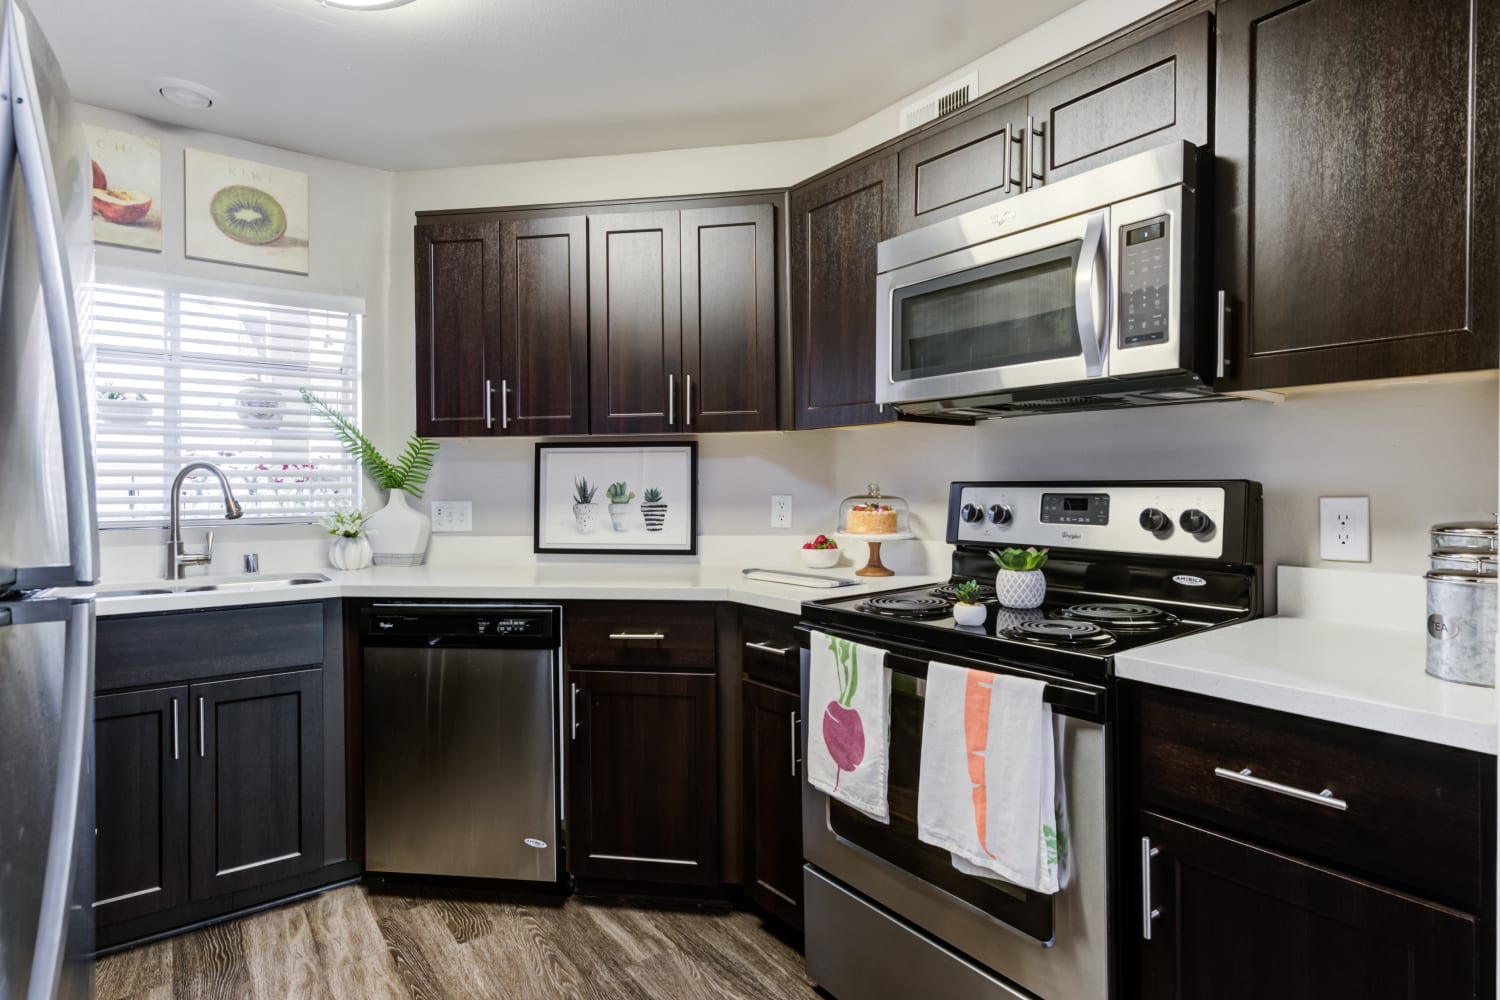 Spacious kitchen area at The Bluffs in Rancho Cucamonga, California